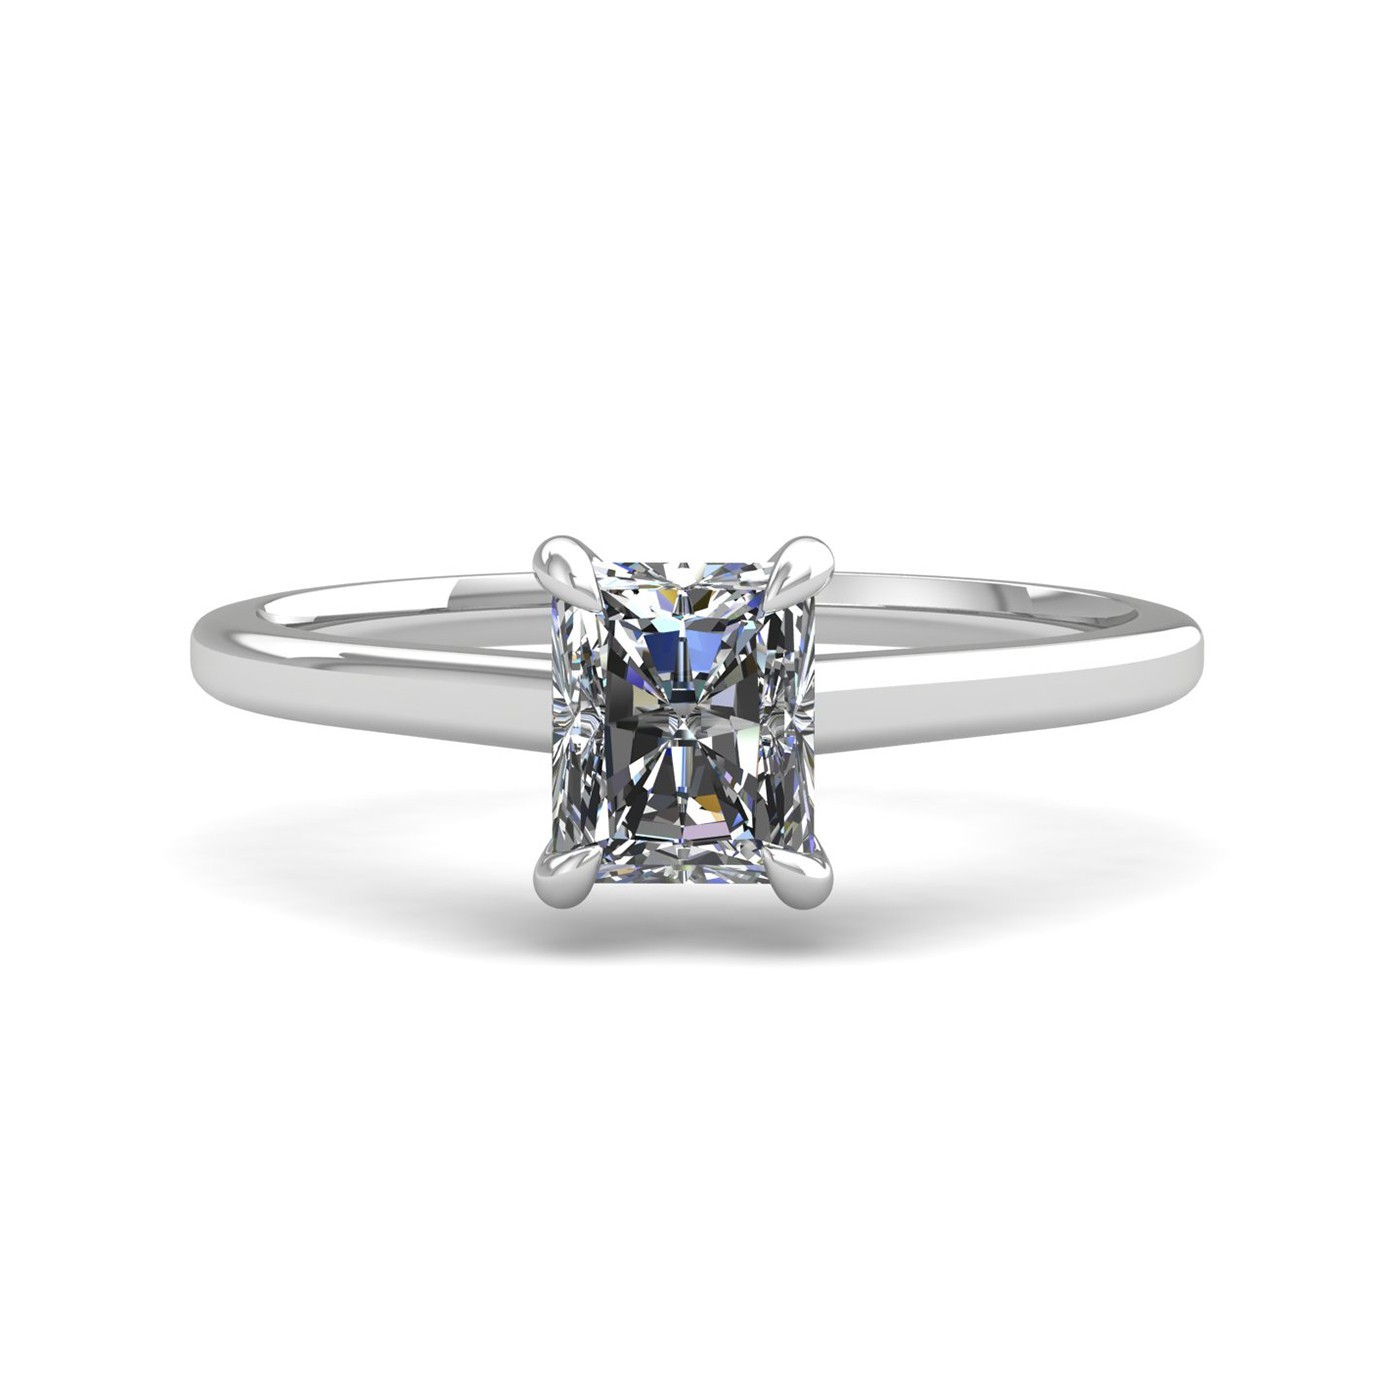 18k white gold  1,20 ct 4 prongs solitaire radiant cut diamond engagement ring with whisper thin band Photos & images